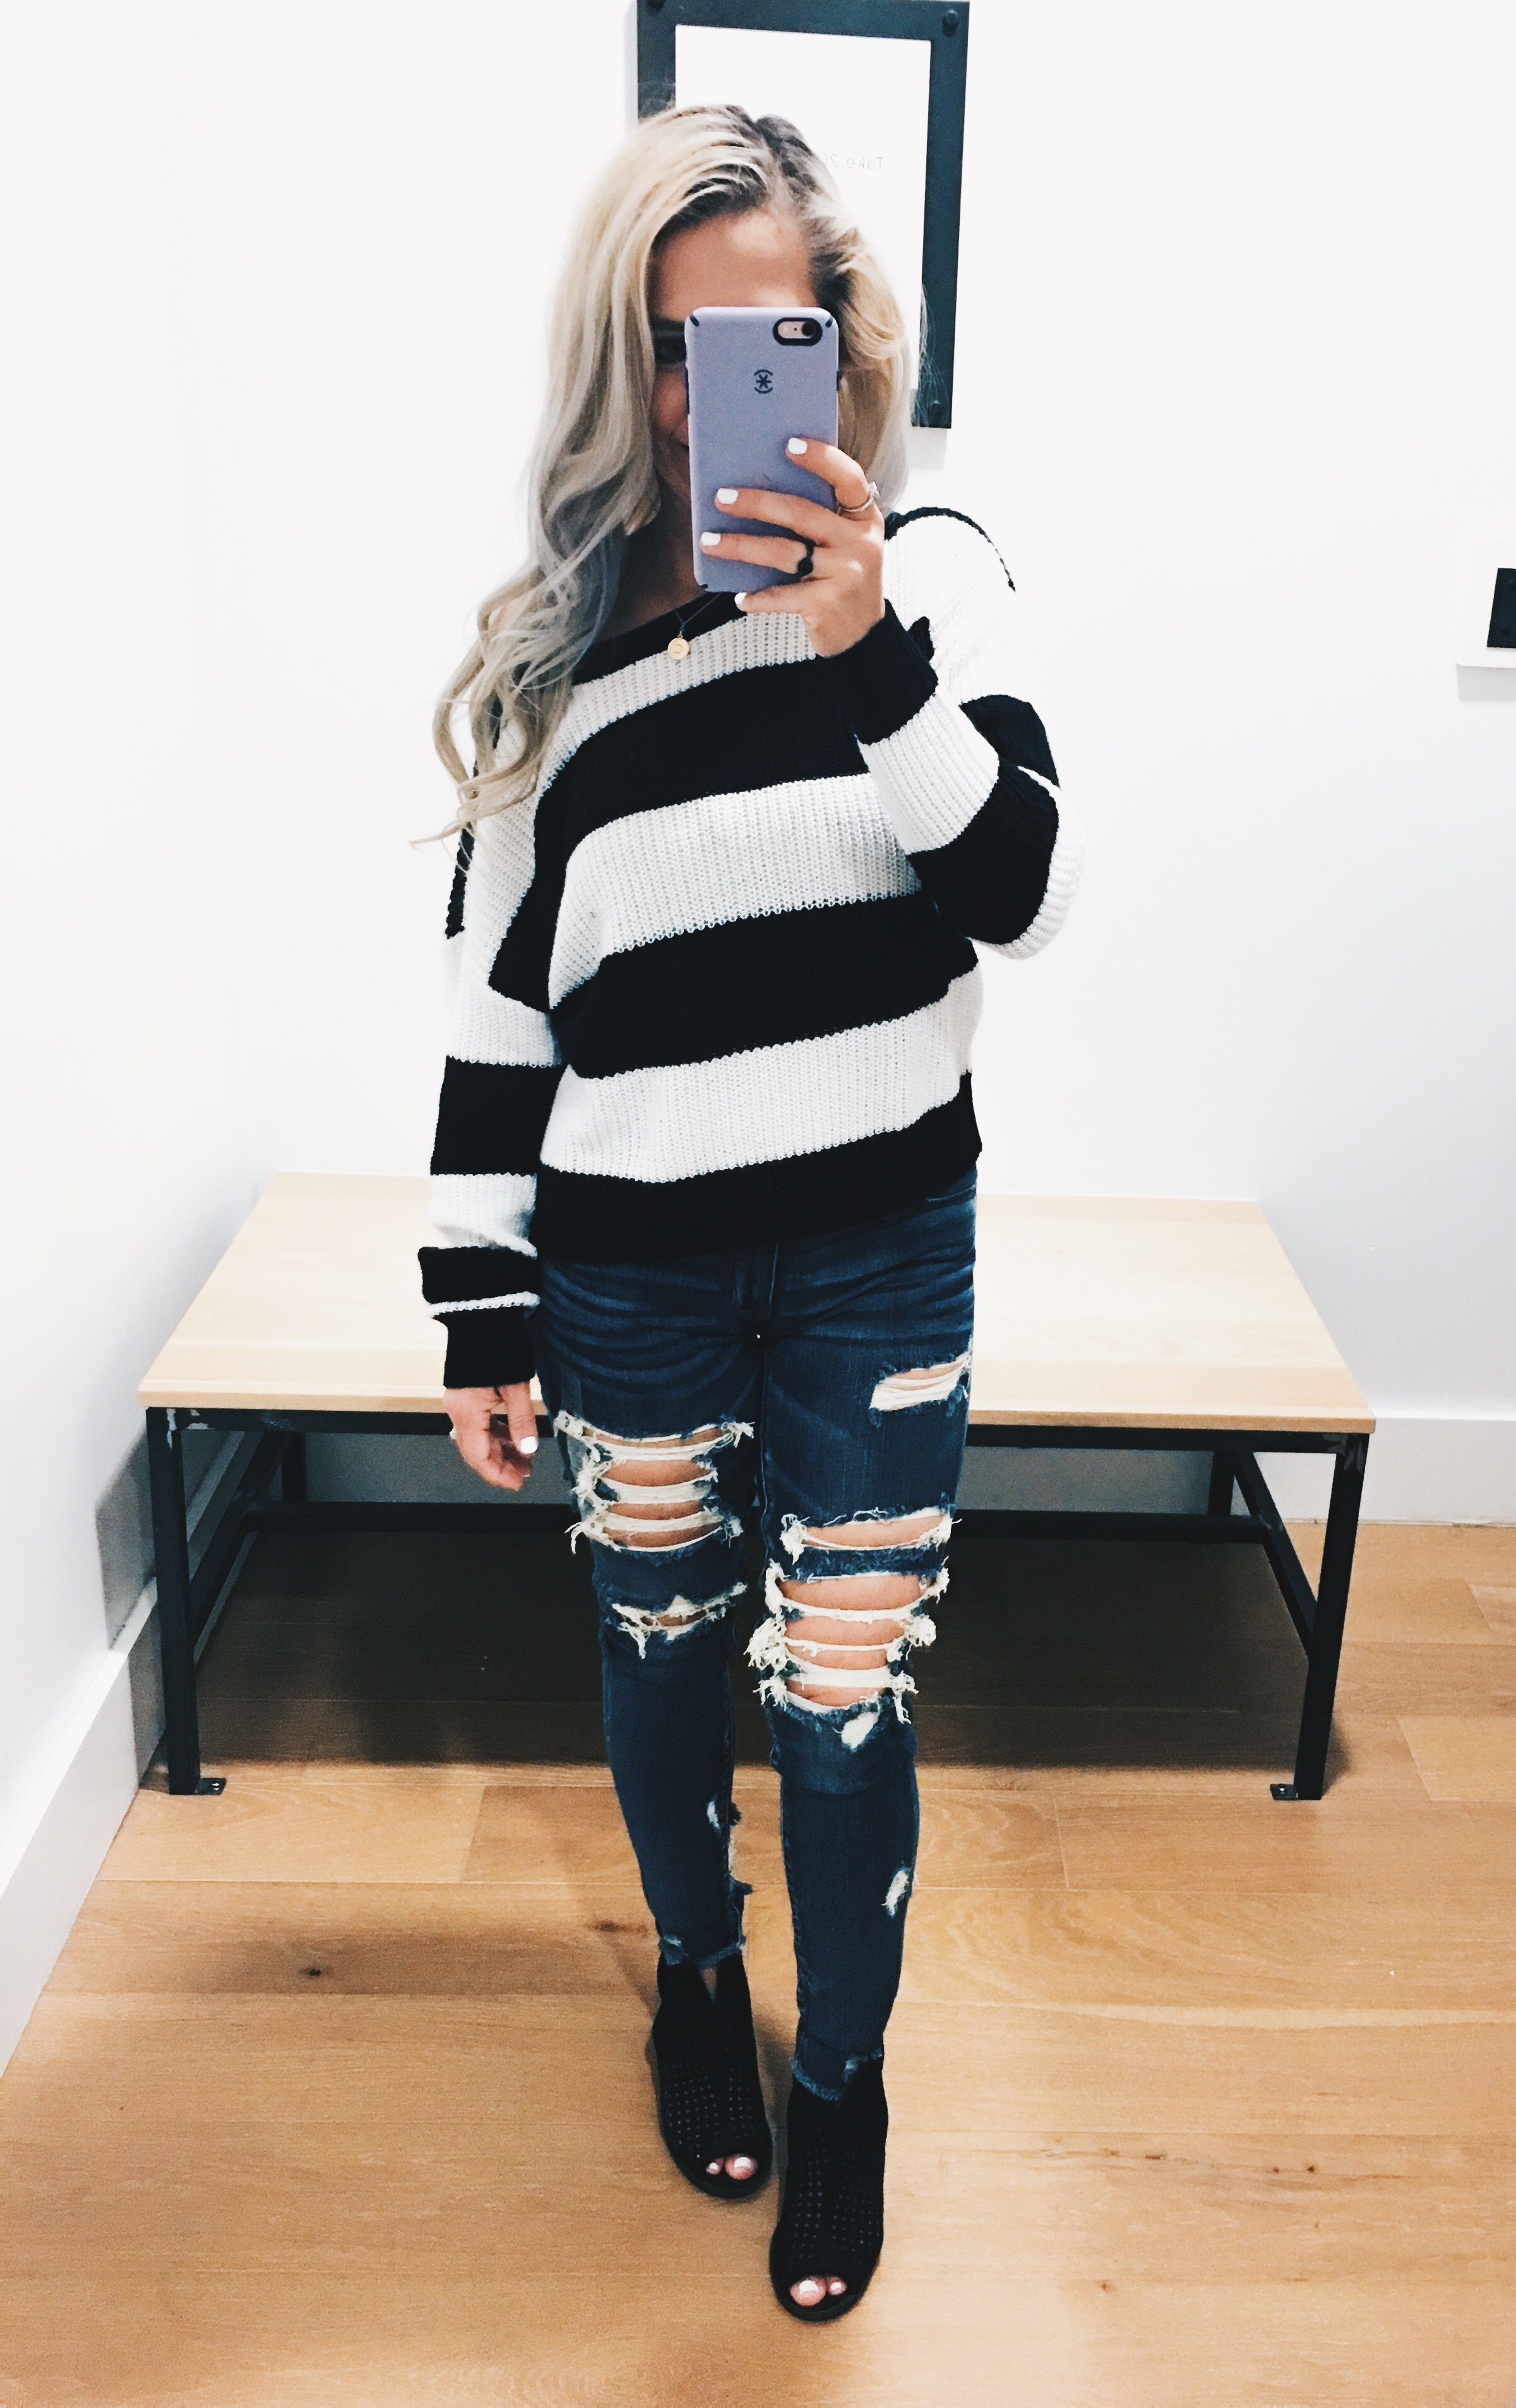 American Eagle Try On Fall 2018 - AE Try On Haul 2018 - American Eagle Try On Session - AE Try On Session - Petite fashion blogger showcases fall 2018 looks from American Eagle, including AE jeans, AE sweaters, and some perfect plaids! #LikeTKit #LTKunder50 #LTKunder100 #FashionBlogger #AExME